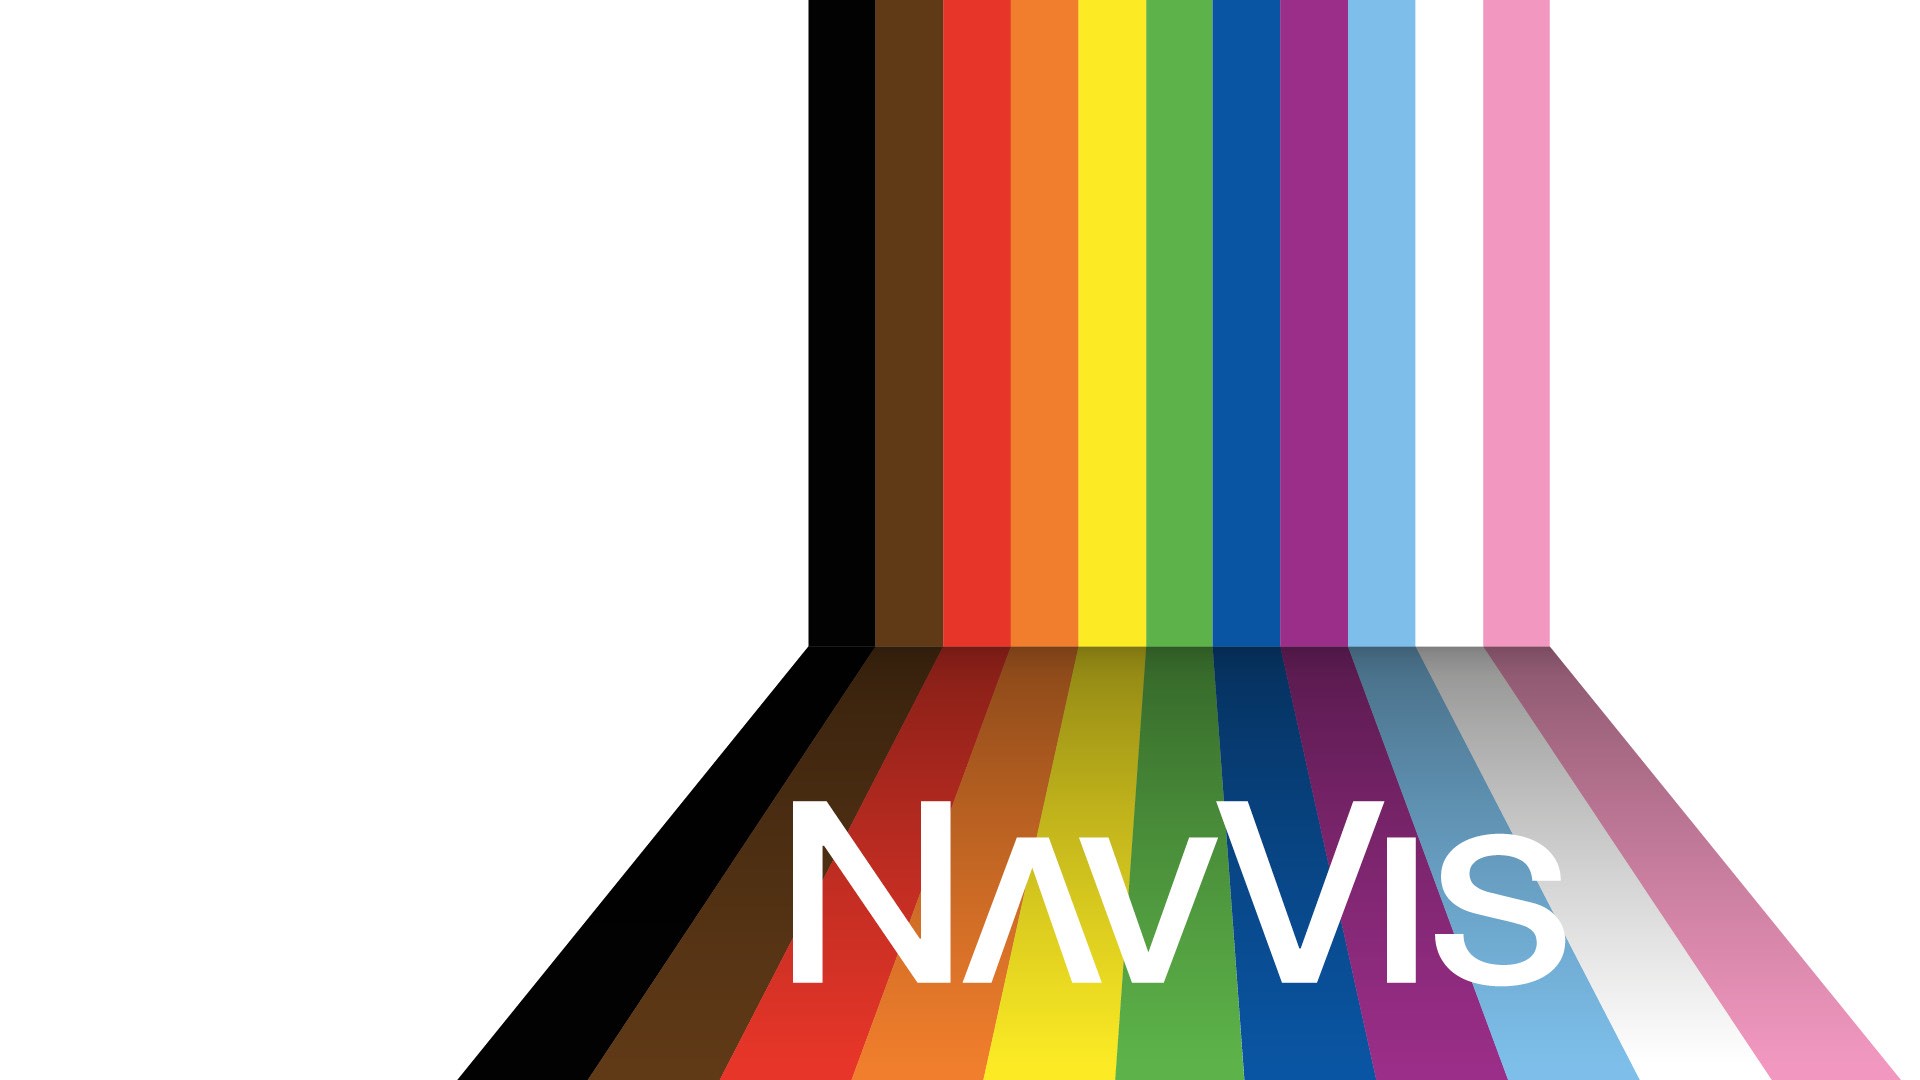 NavVis Proud: Miriam (she/her) on inclusive language in the workplace